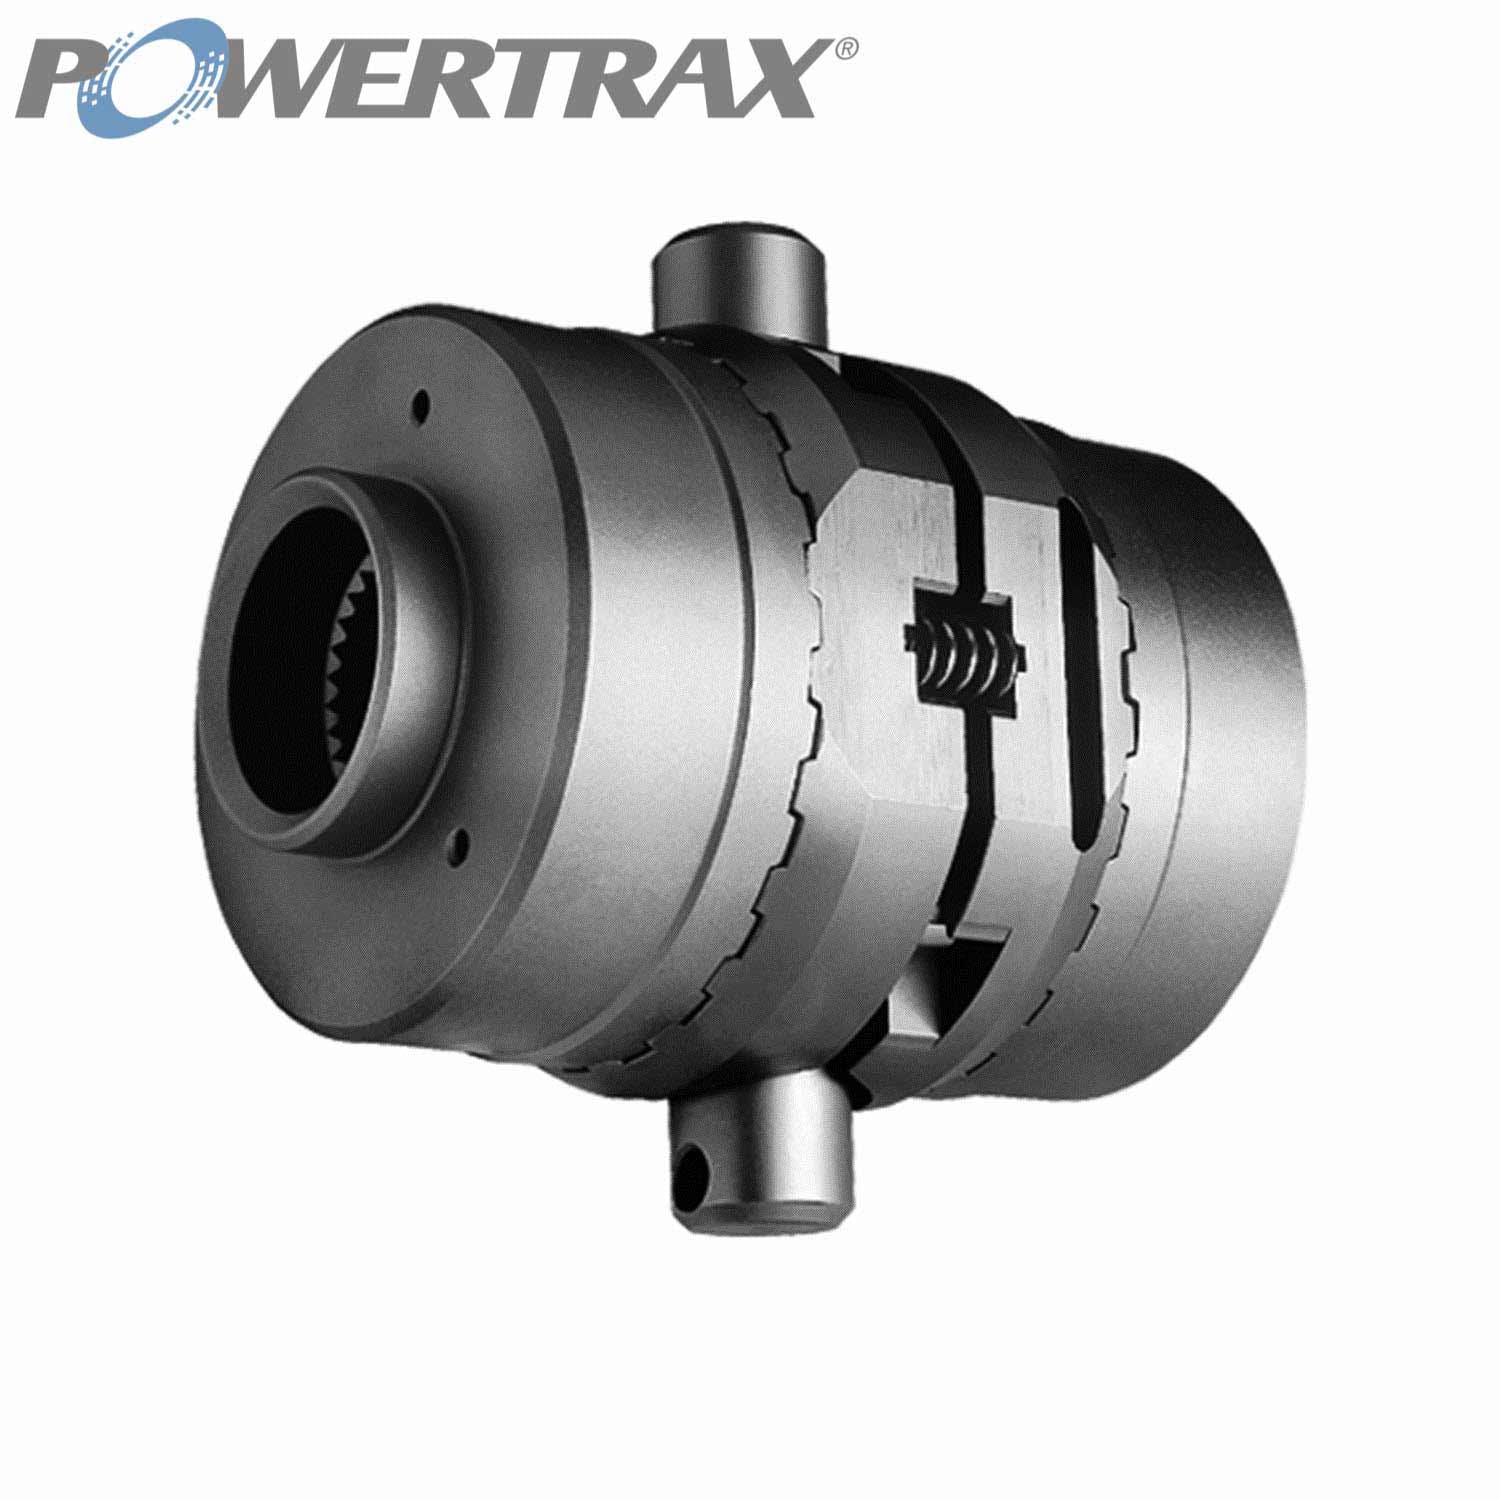 PowerTrax 9204443001 No-Slip Traction System